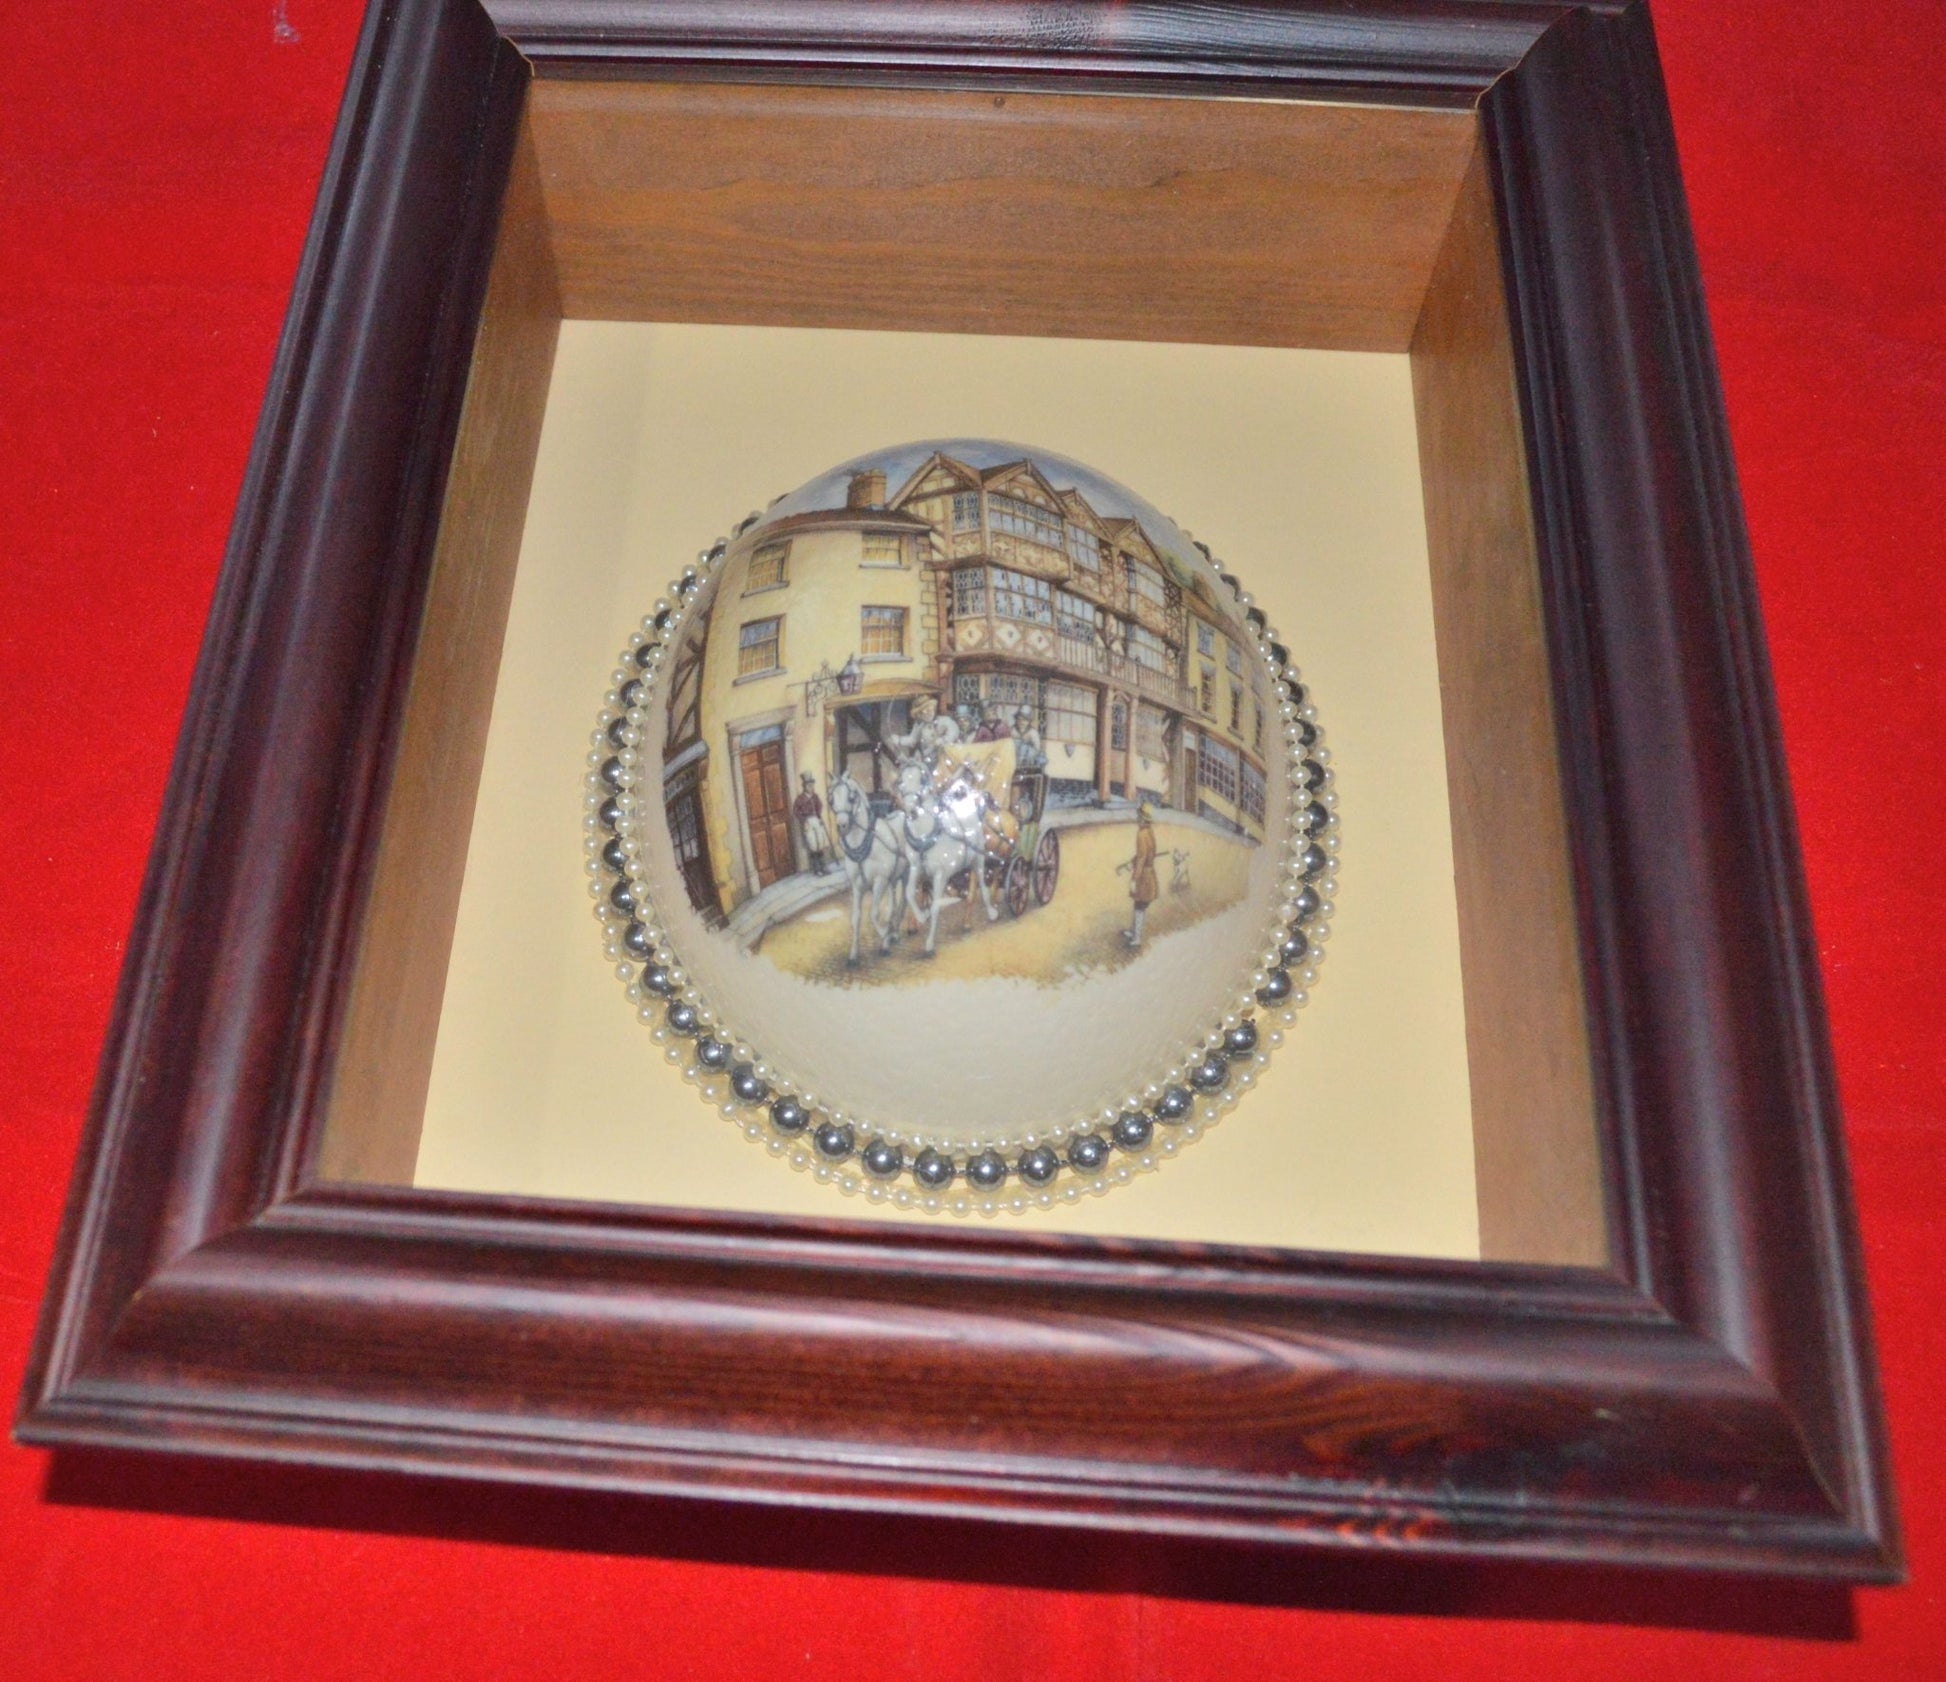 HAND PAINTED HALF OSTRICH EGG IN SHADOW BOX(PREVIOUSLY OWNED) VERY GOOD CONDITION - TMD167207